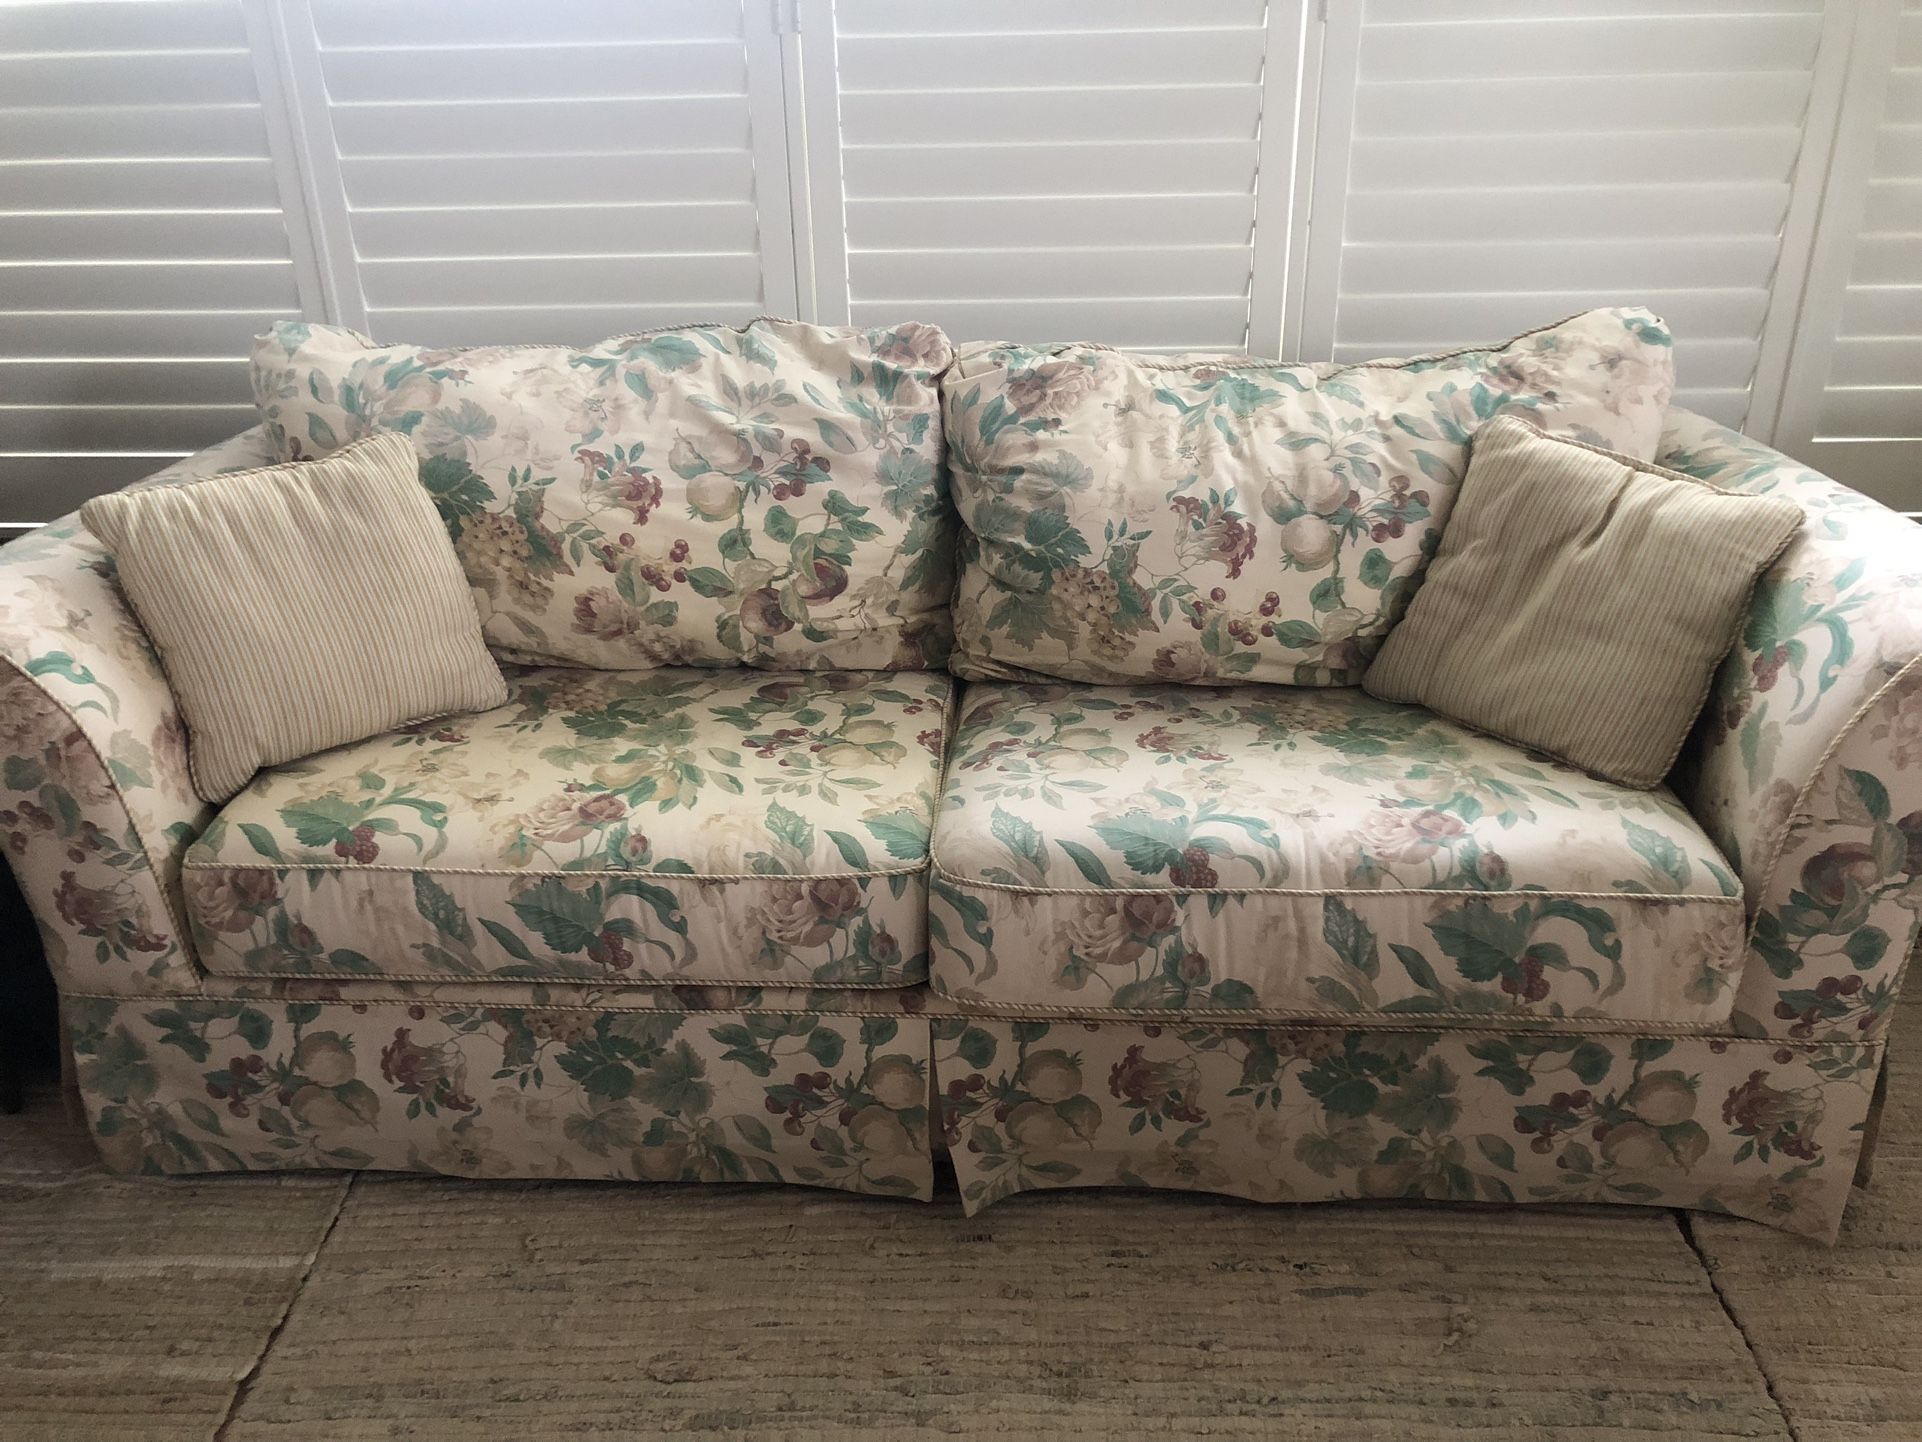 8ft Floral Couch 